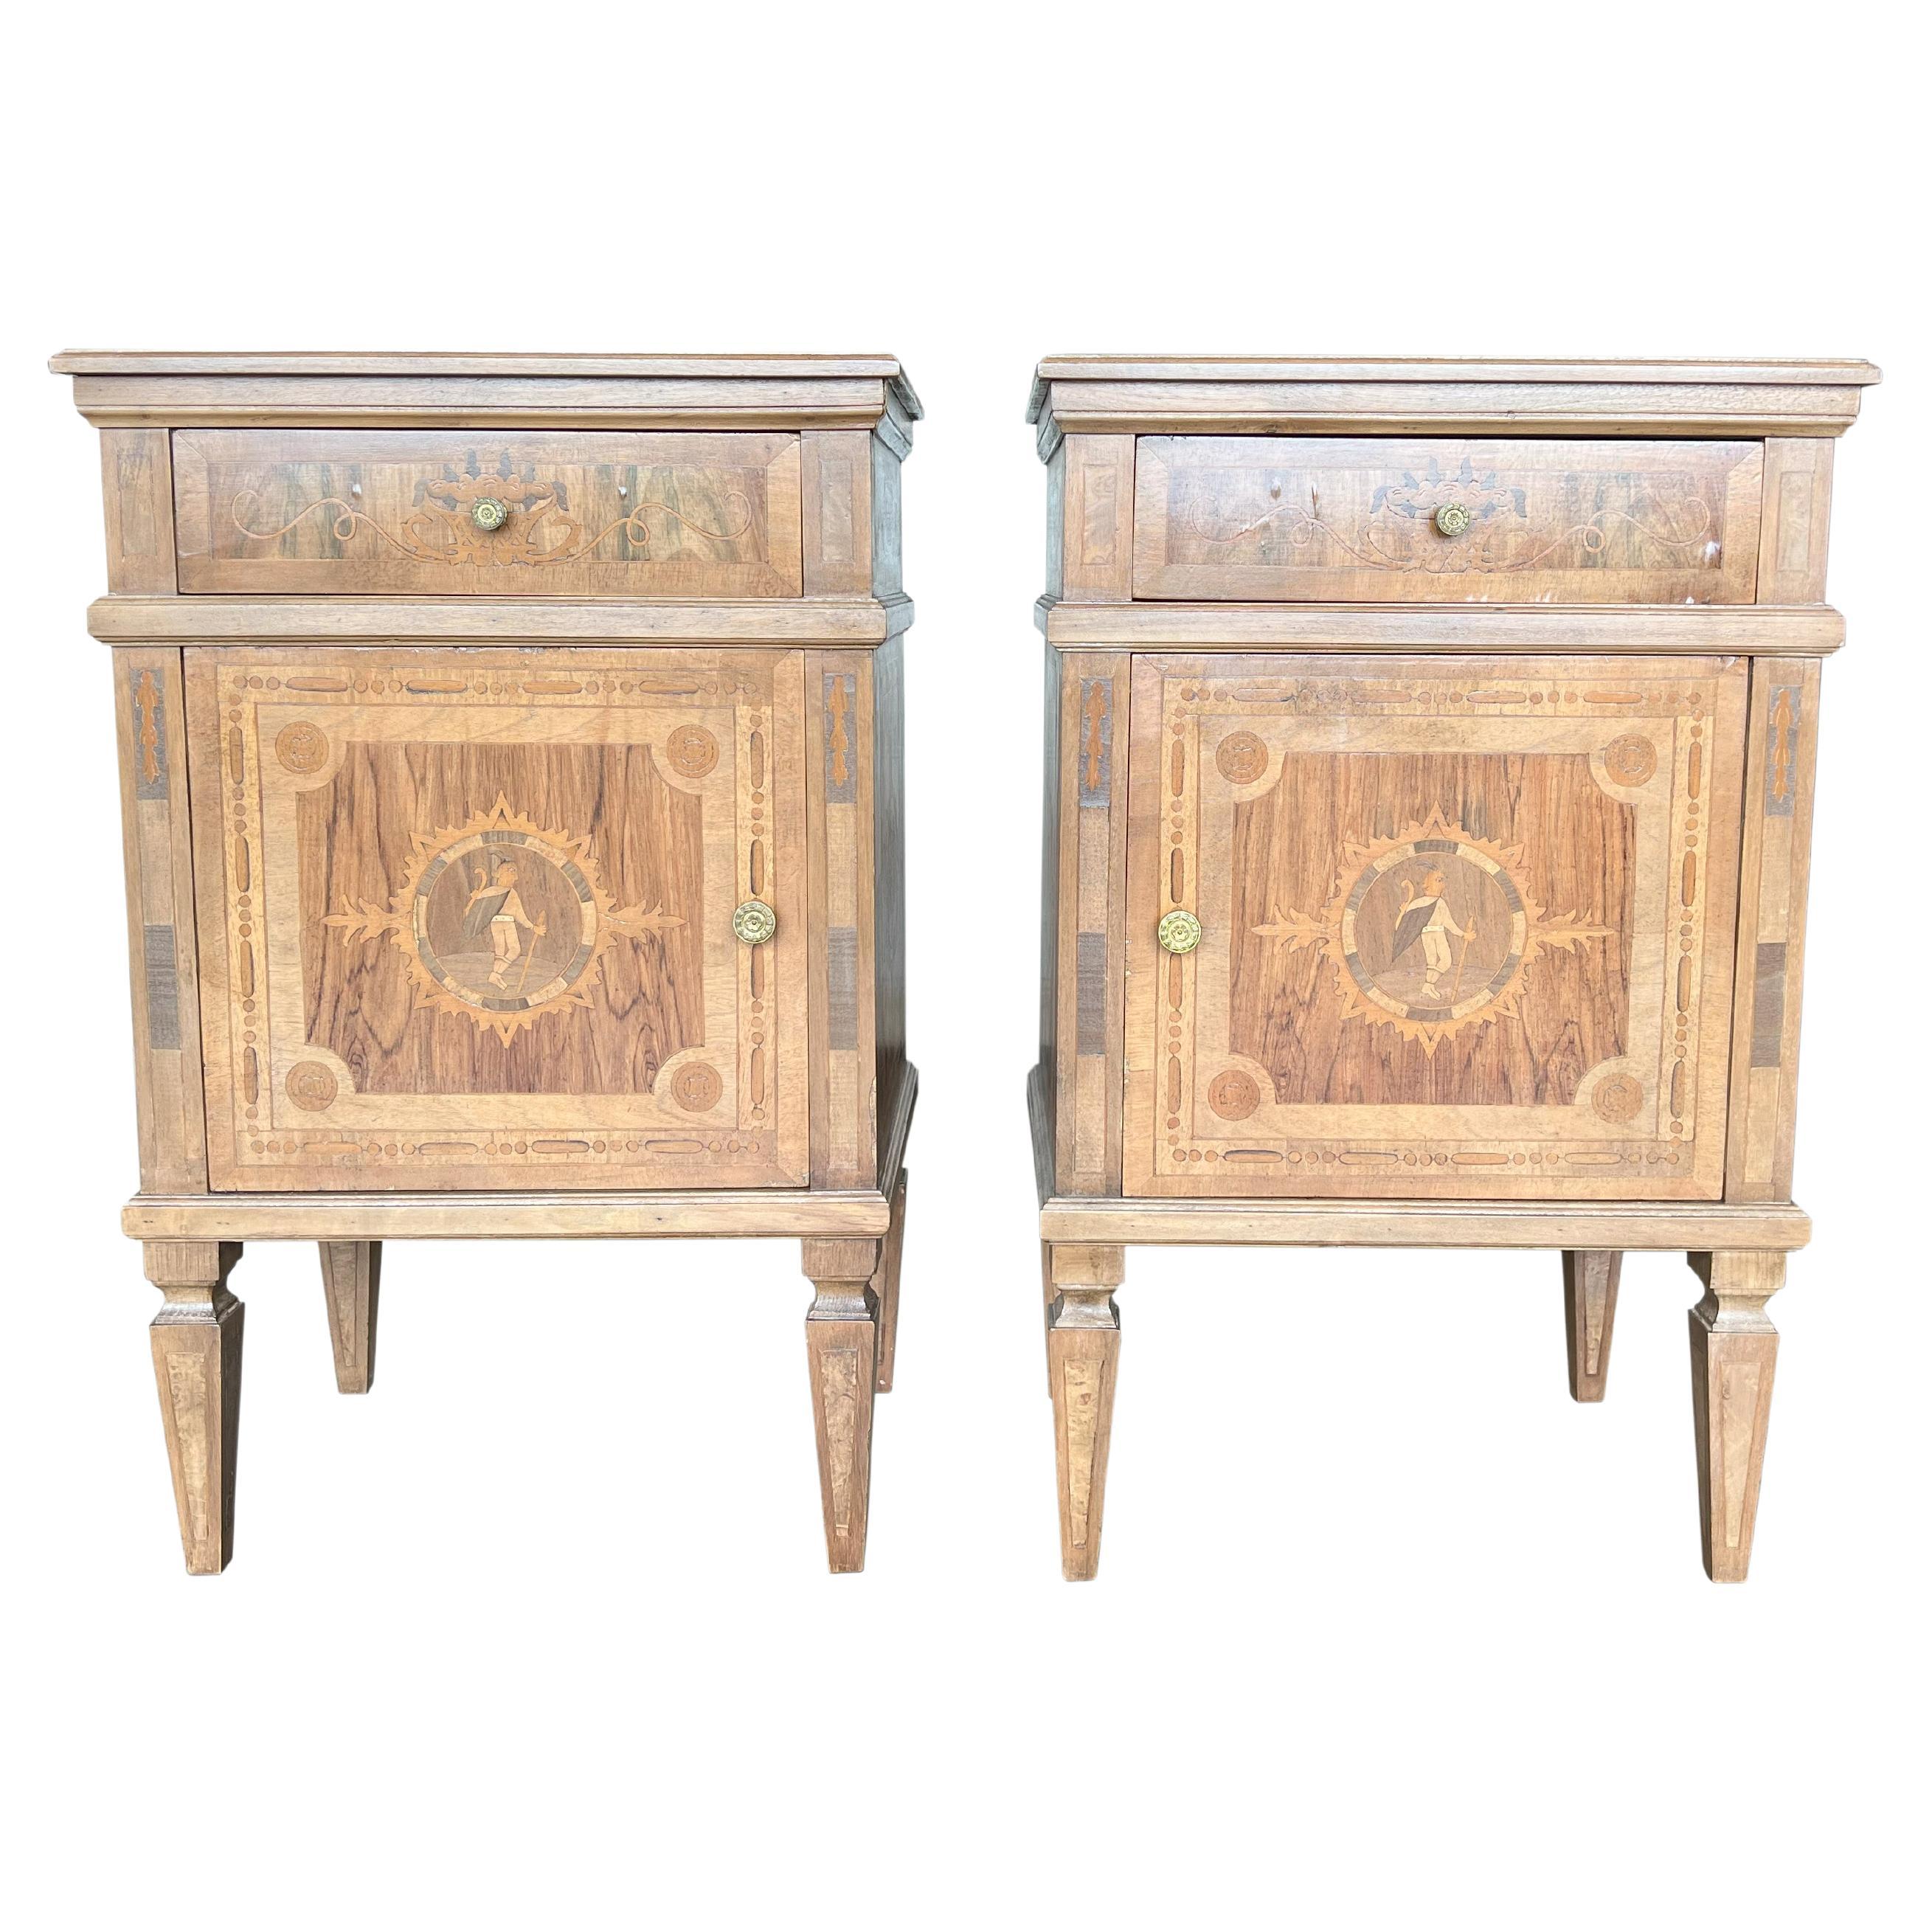 Louis XVI Style Tuscan Italian Walnut Nightstand Pair with Inlay Marquetry  